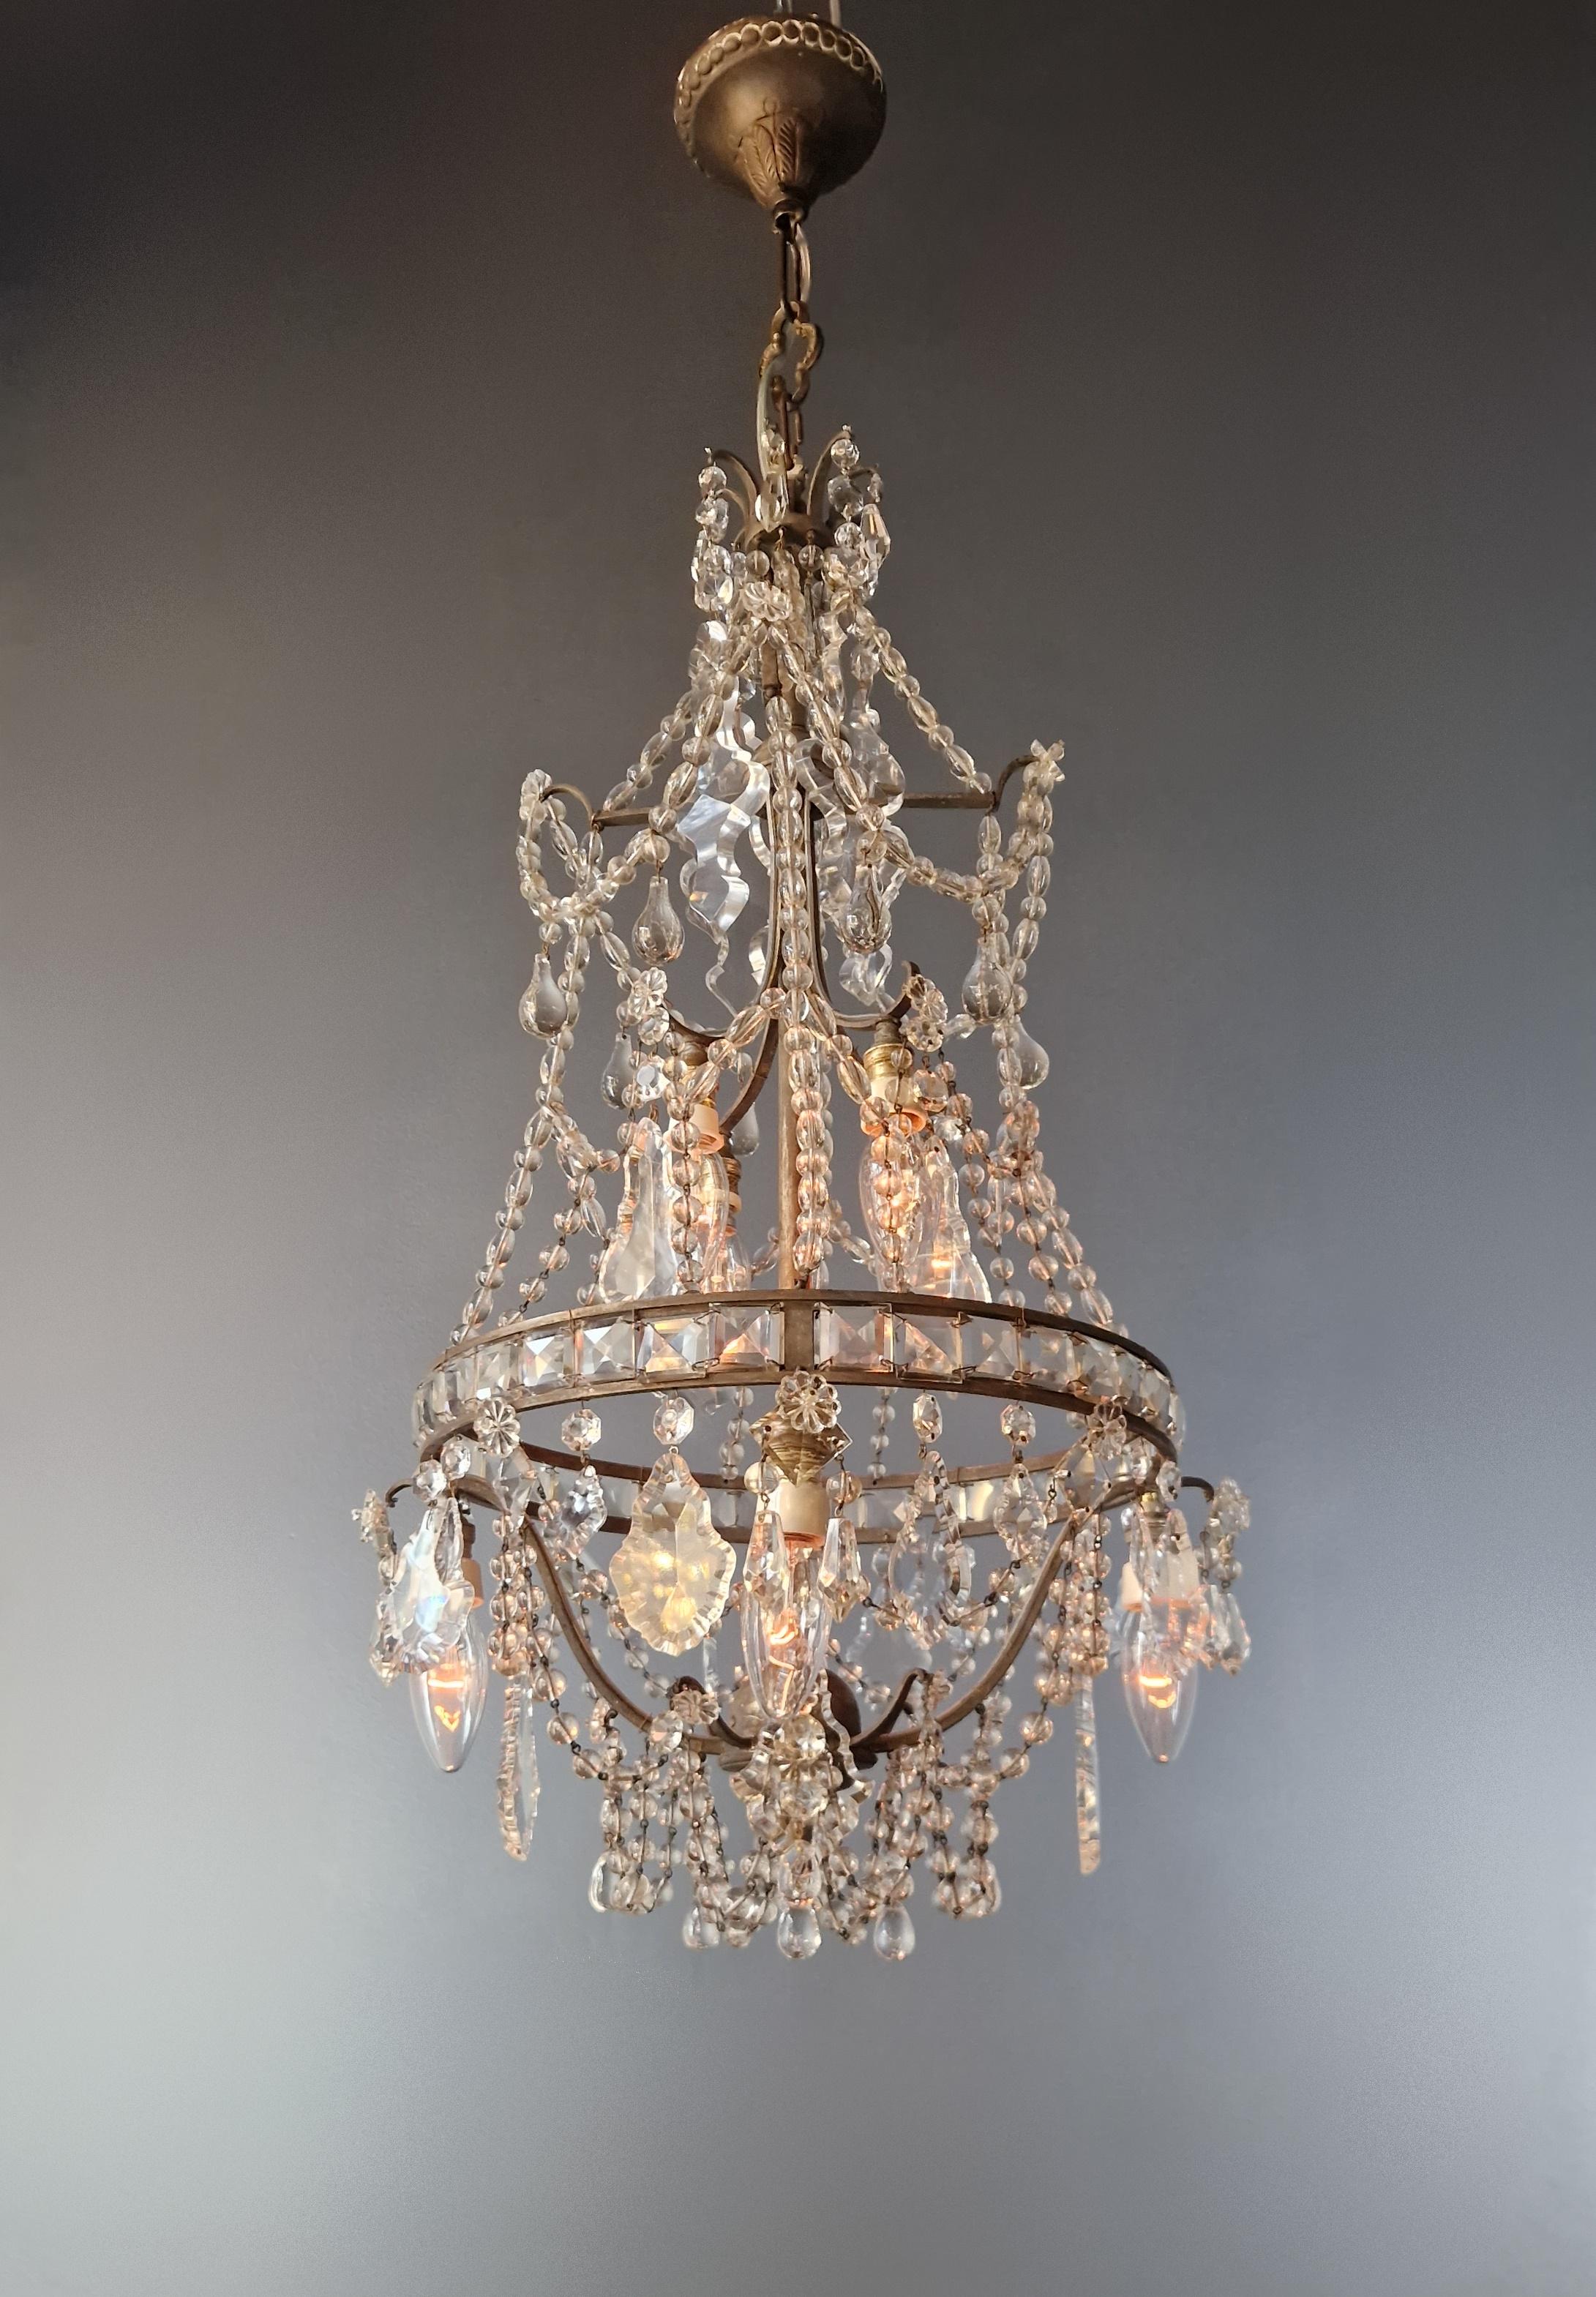 Anglo-Indian Lustre A Cage Antique Art Nouveau Brass Ceiling Crystal Chandelier For Sale